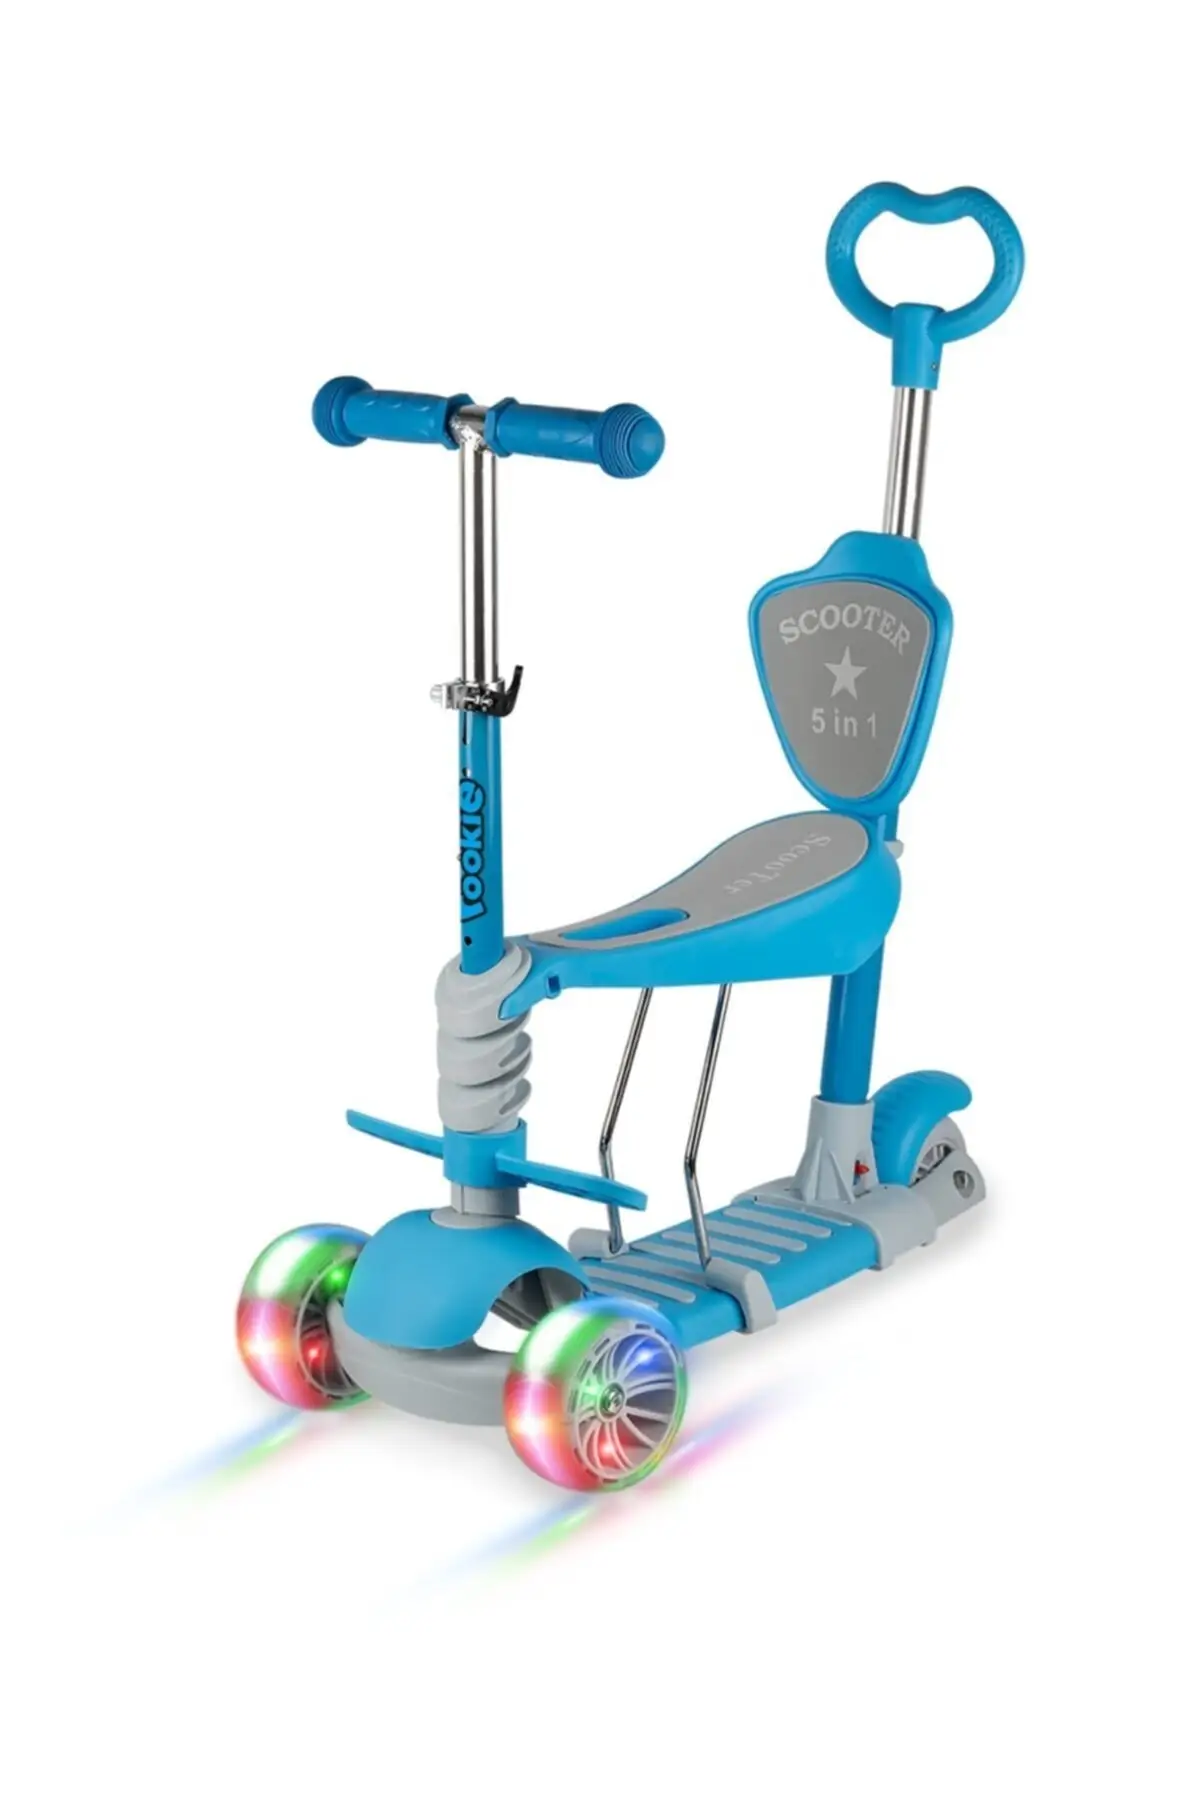 Kick Scooters,Foot Scooters